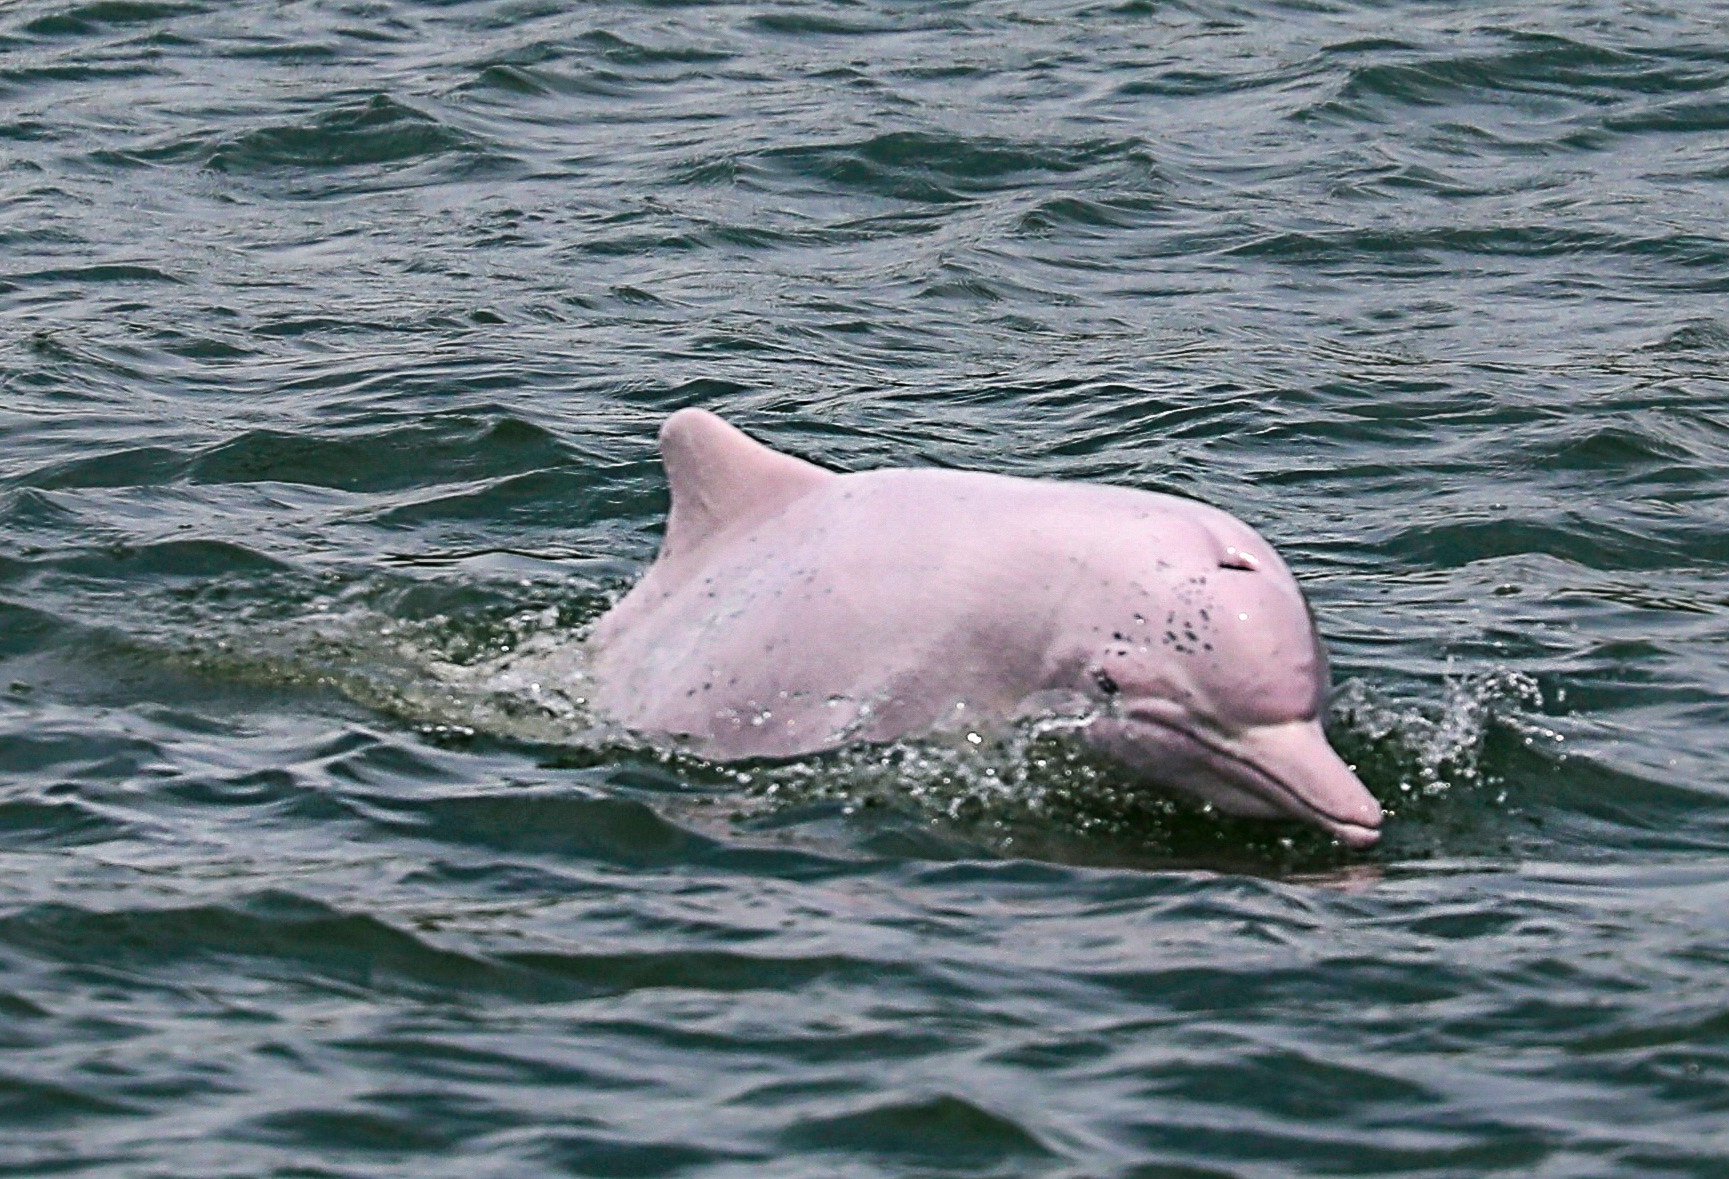 A Chinese white dolphin, which is considered a vulnerable species, in Lantau waters. Photo: Xiaomei Chen